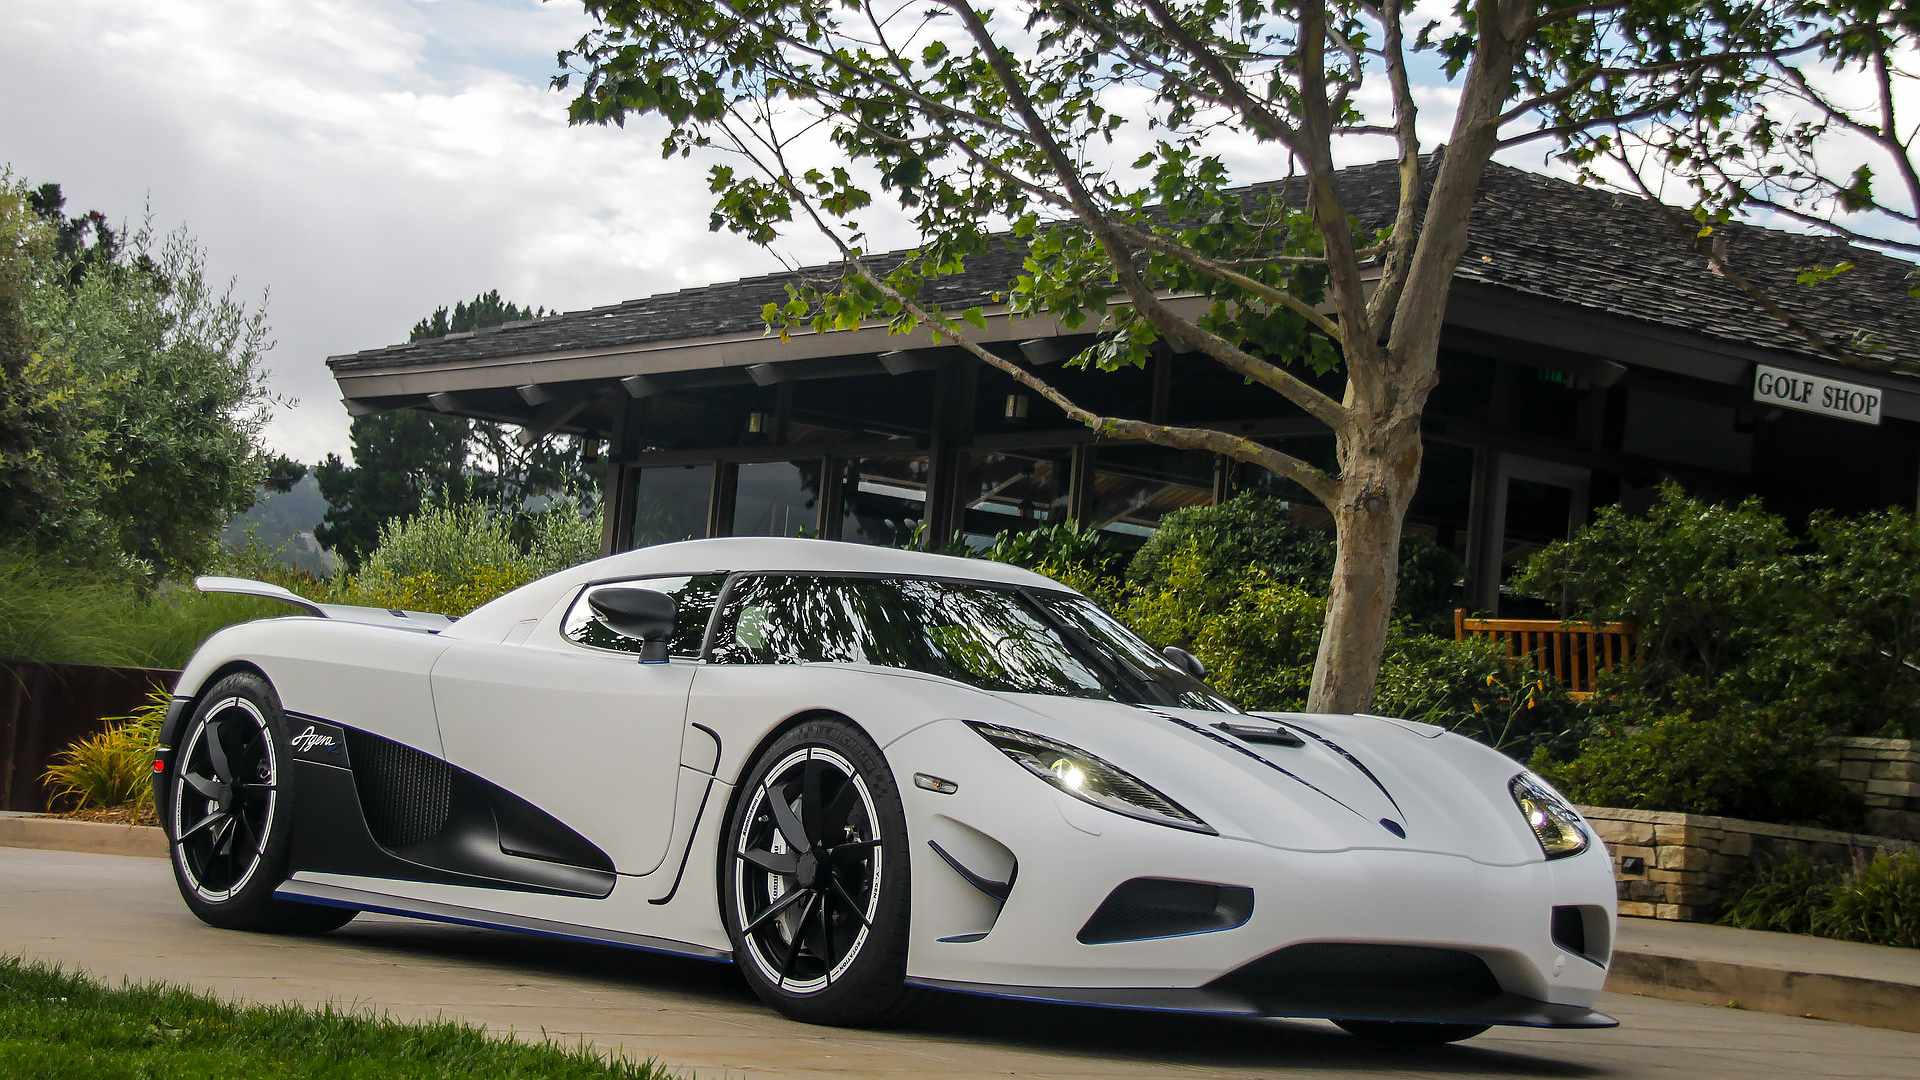 Free Download Hd White Koenigsegg Agera R Supercar Wallpapers Car Pictures 1920x1080 For Your Desktop Mobile Tablet Explore 47 Koenigsegg Agera R Wallpaper 1080p Koenigsegg Wallpapers Koenigsegg Agera R